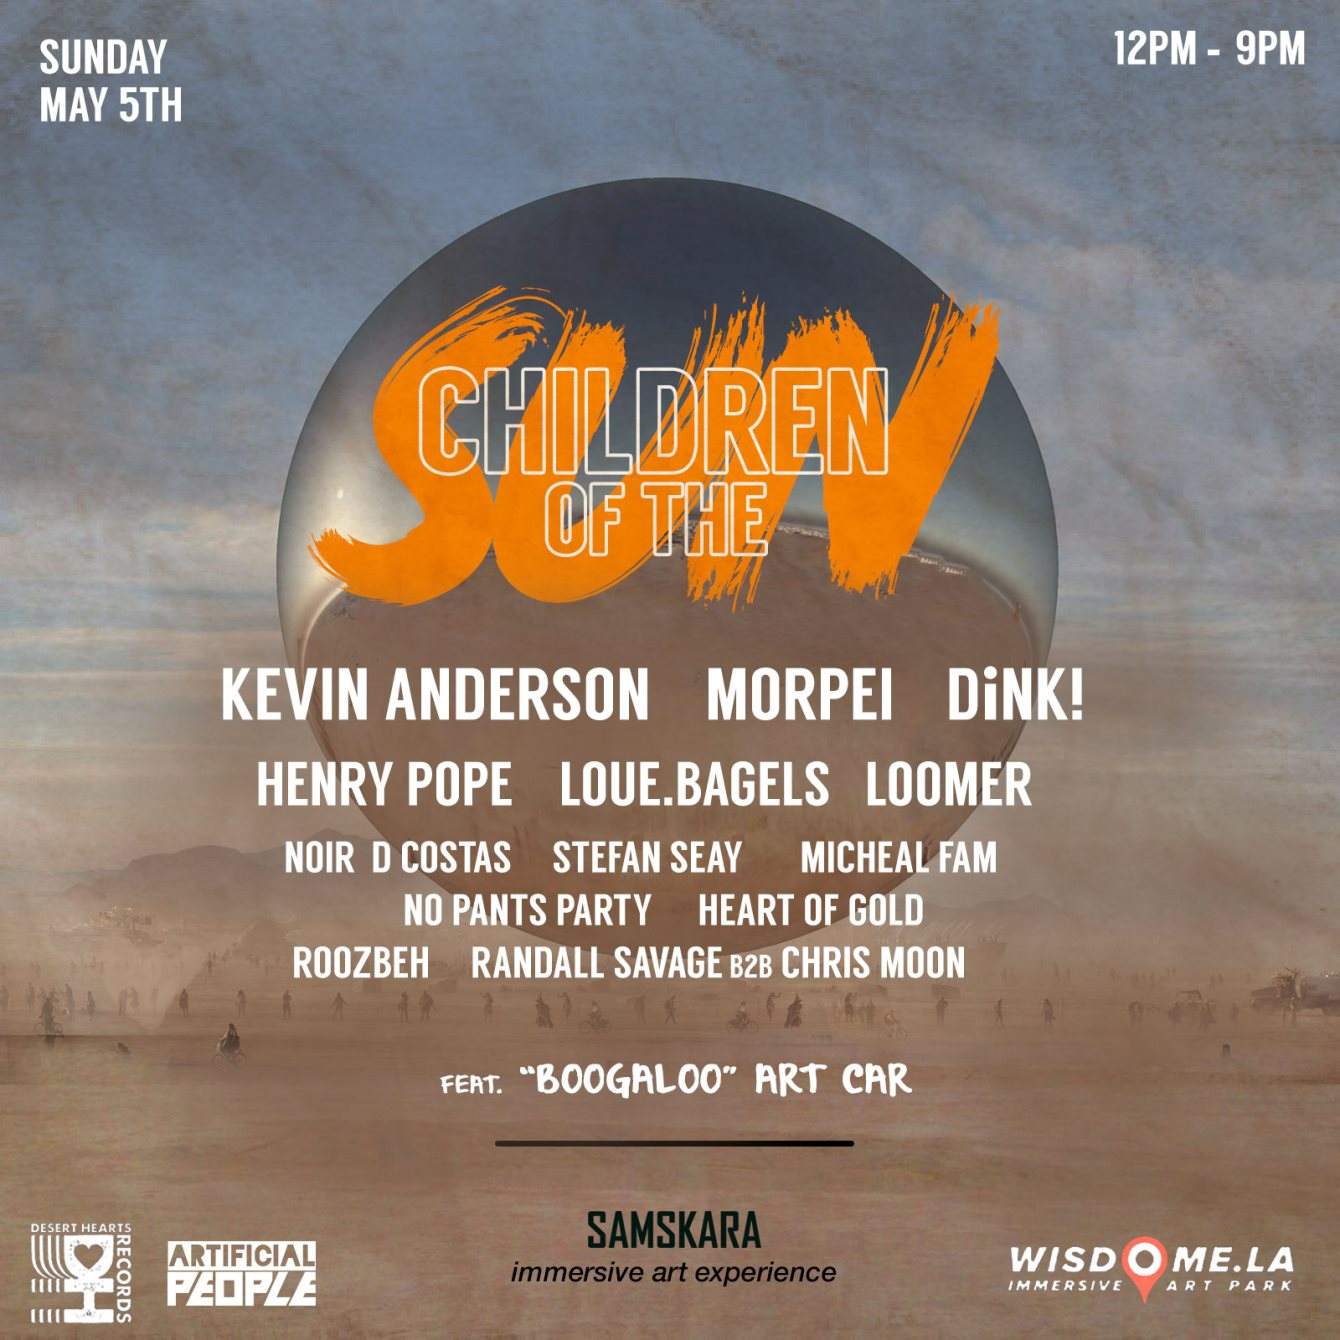 Children of the sun (Kevin Anderson, MorpDink!, Dirty Beetles, Henry Pope, Loomer) - フライヤー表